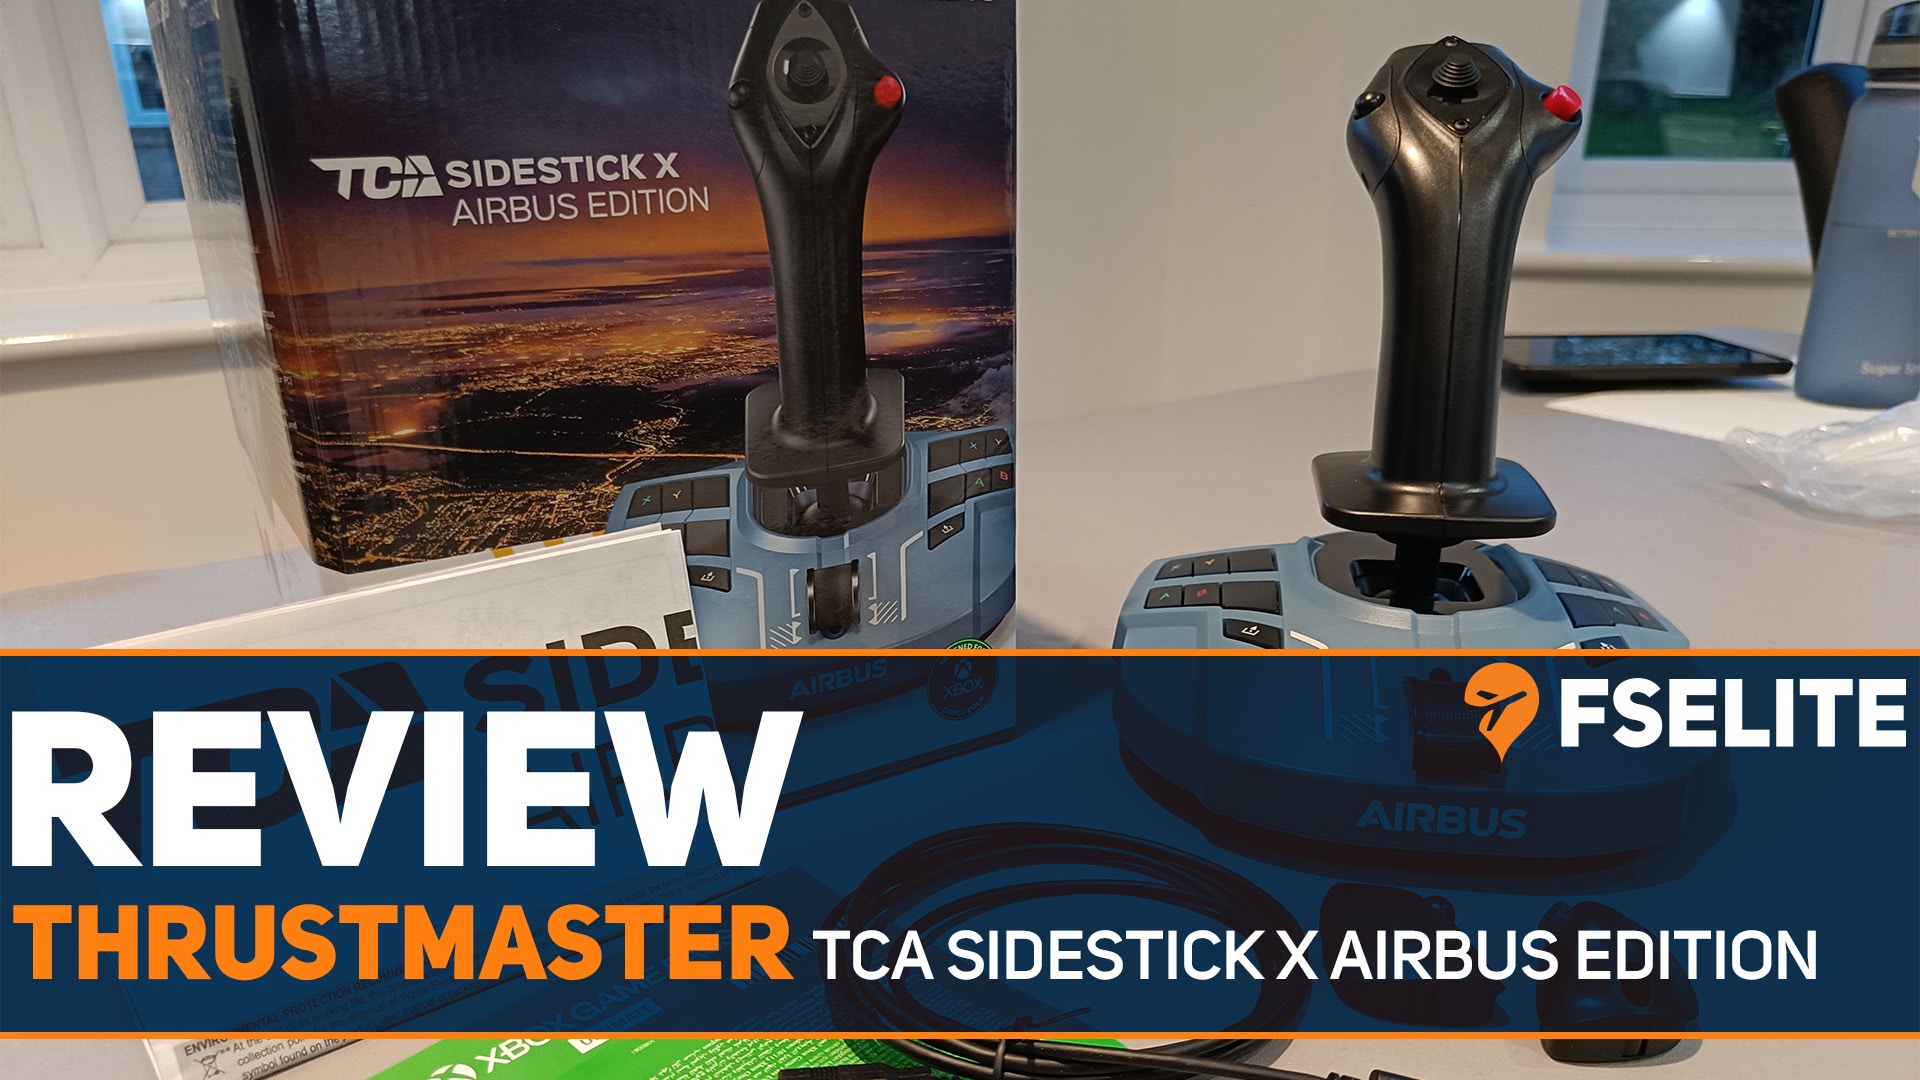 Edition Sidestick FSElite X Thrustmaster Airbus Review: TCA -